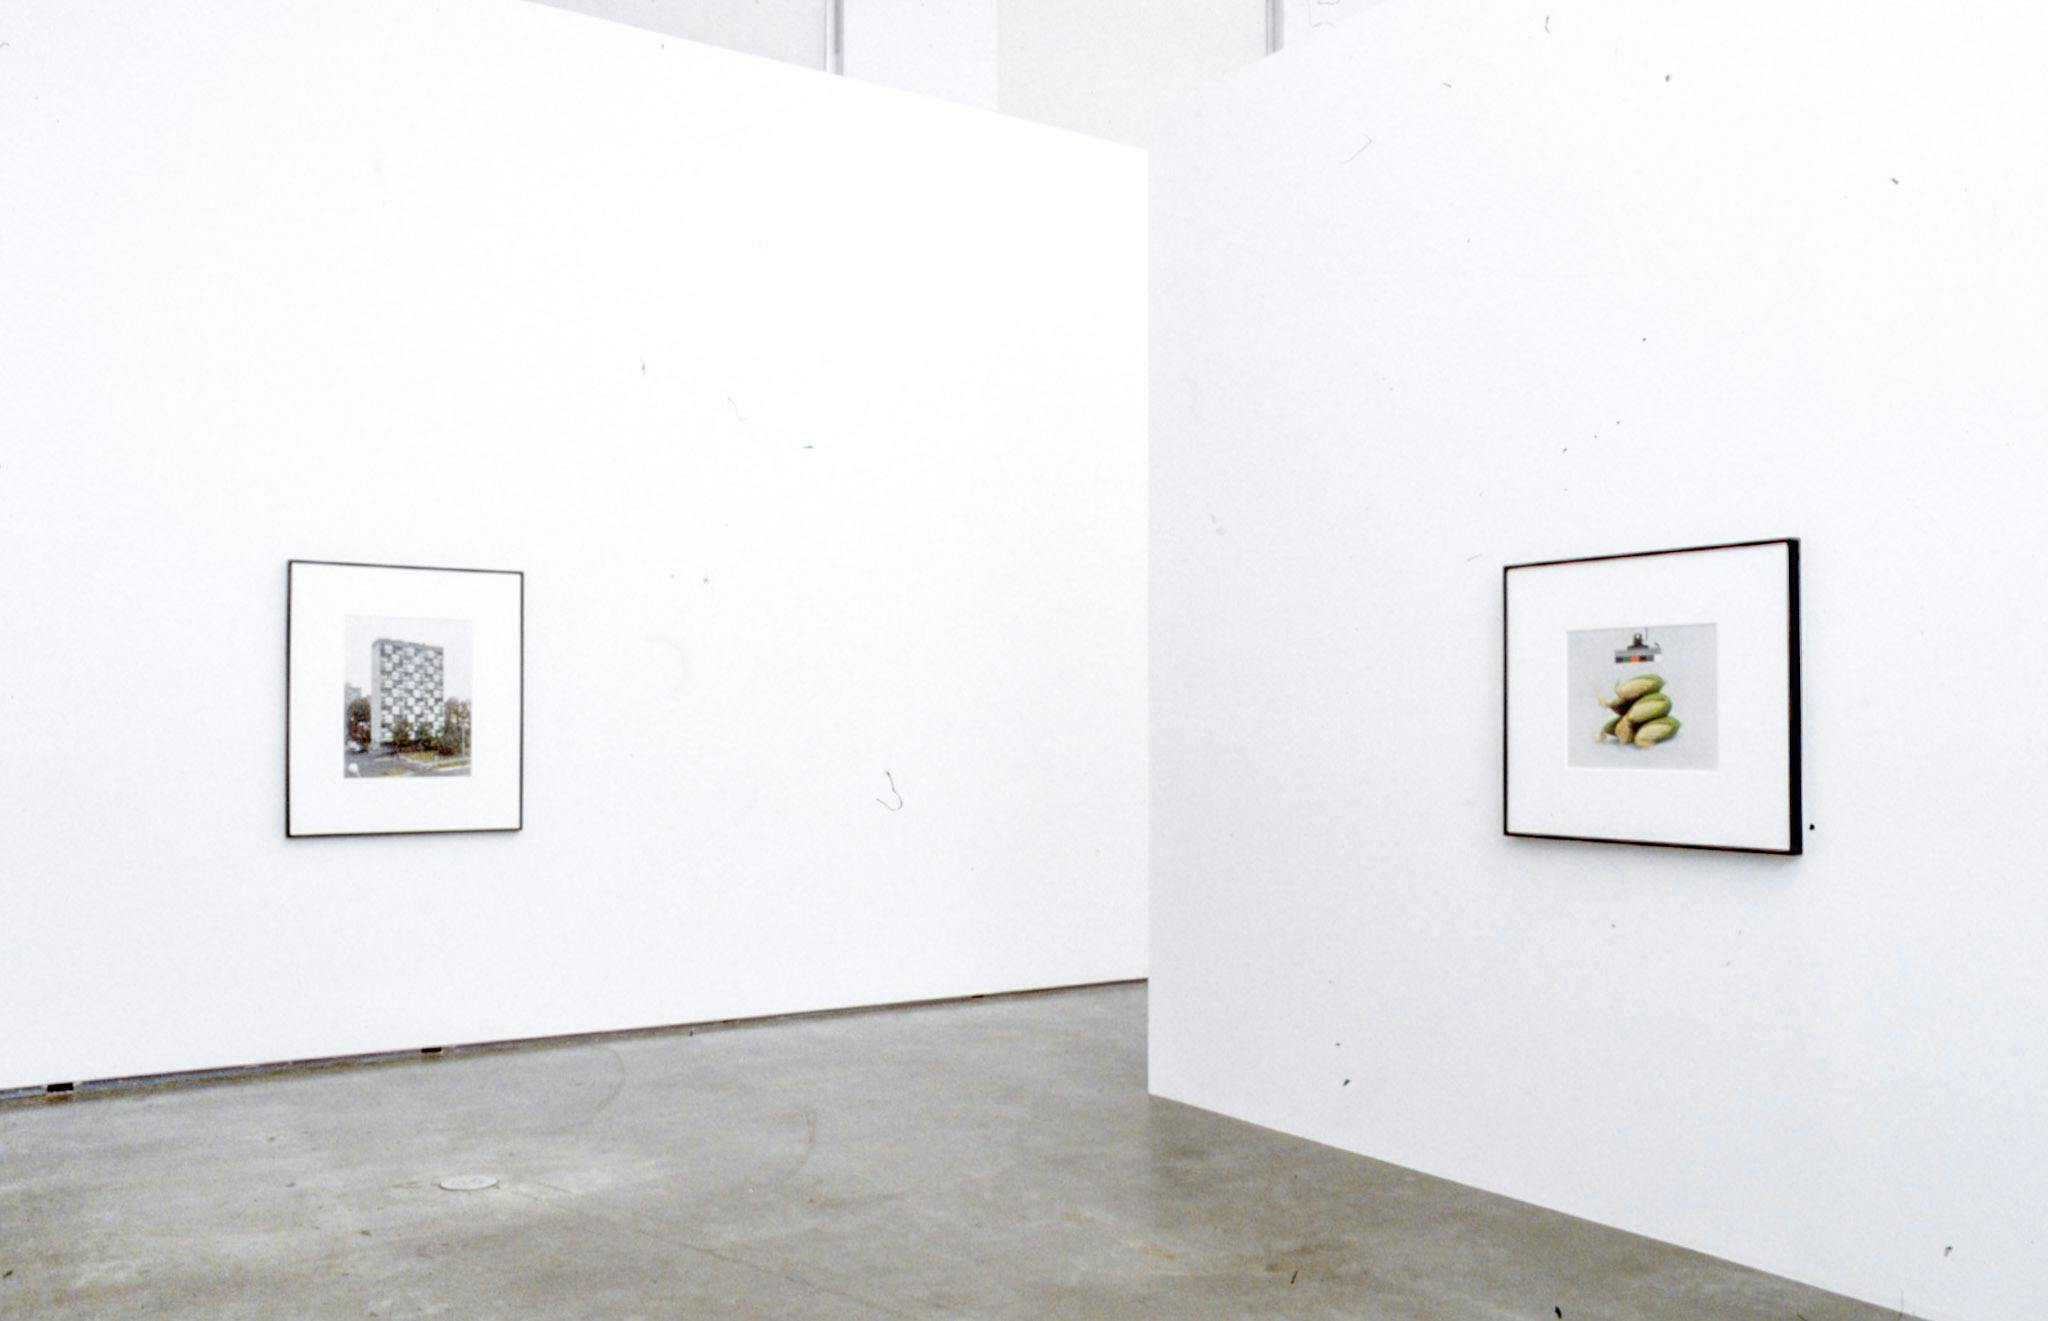 An installation image of two coloured photographs on gallery walls. The photograph on the right-hand side shows a pile of six corn cabs. The one on the left shows an apartment building. 